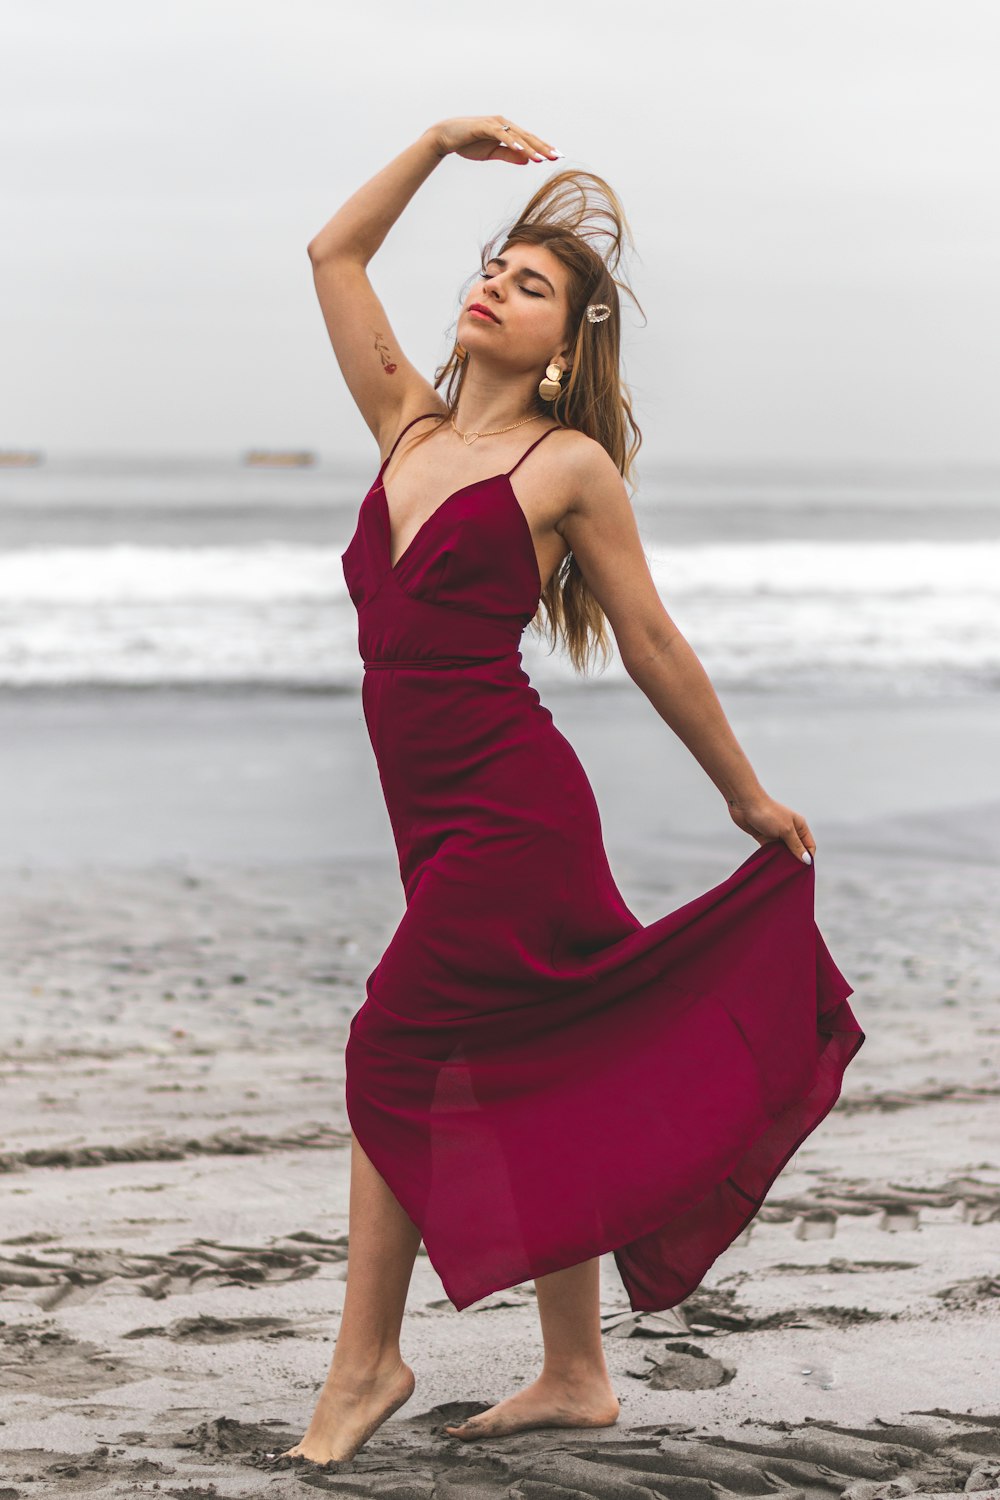 Woman In Dress Pictures | Download Free Images on Unsplash